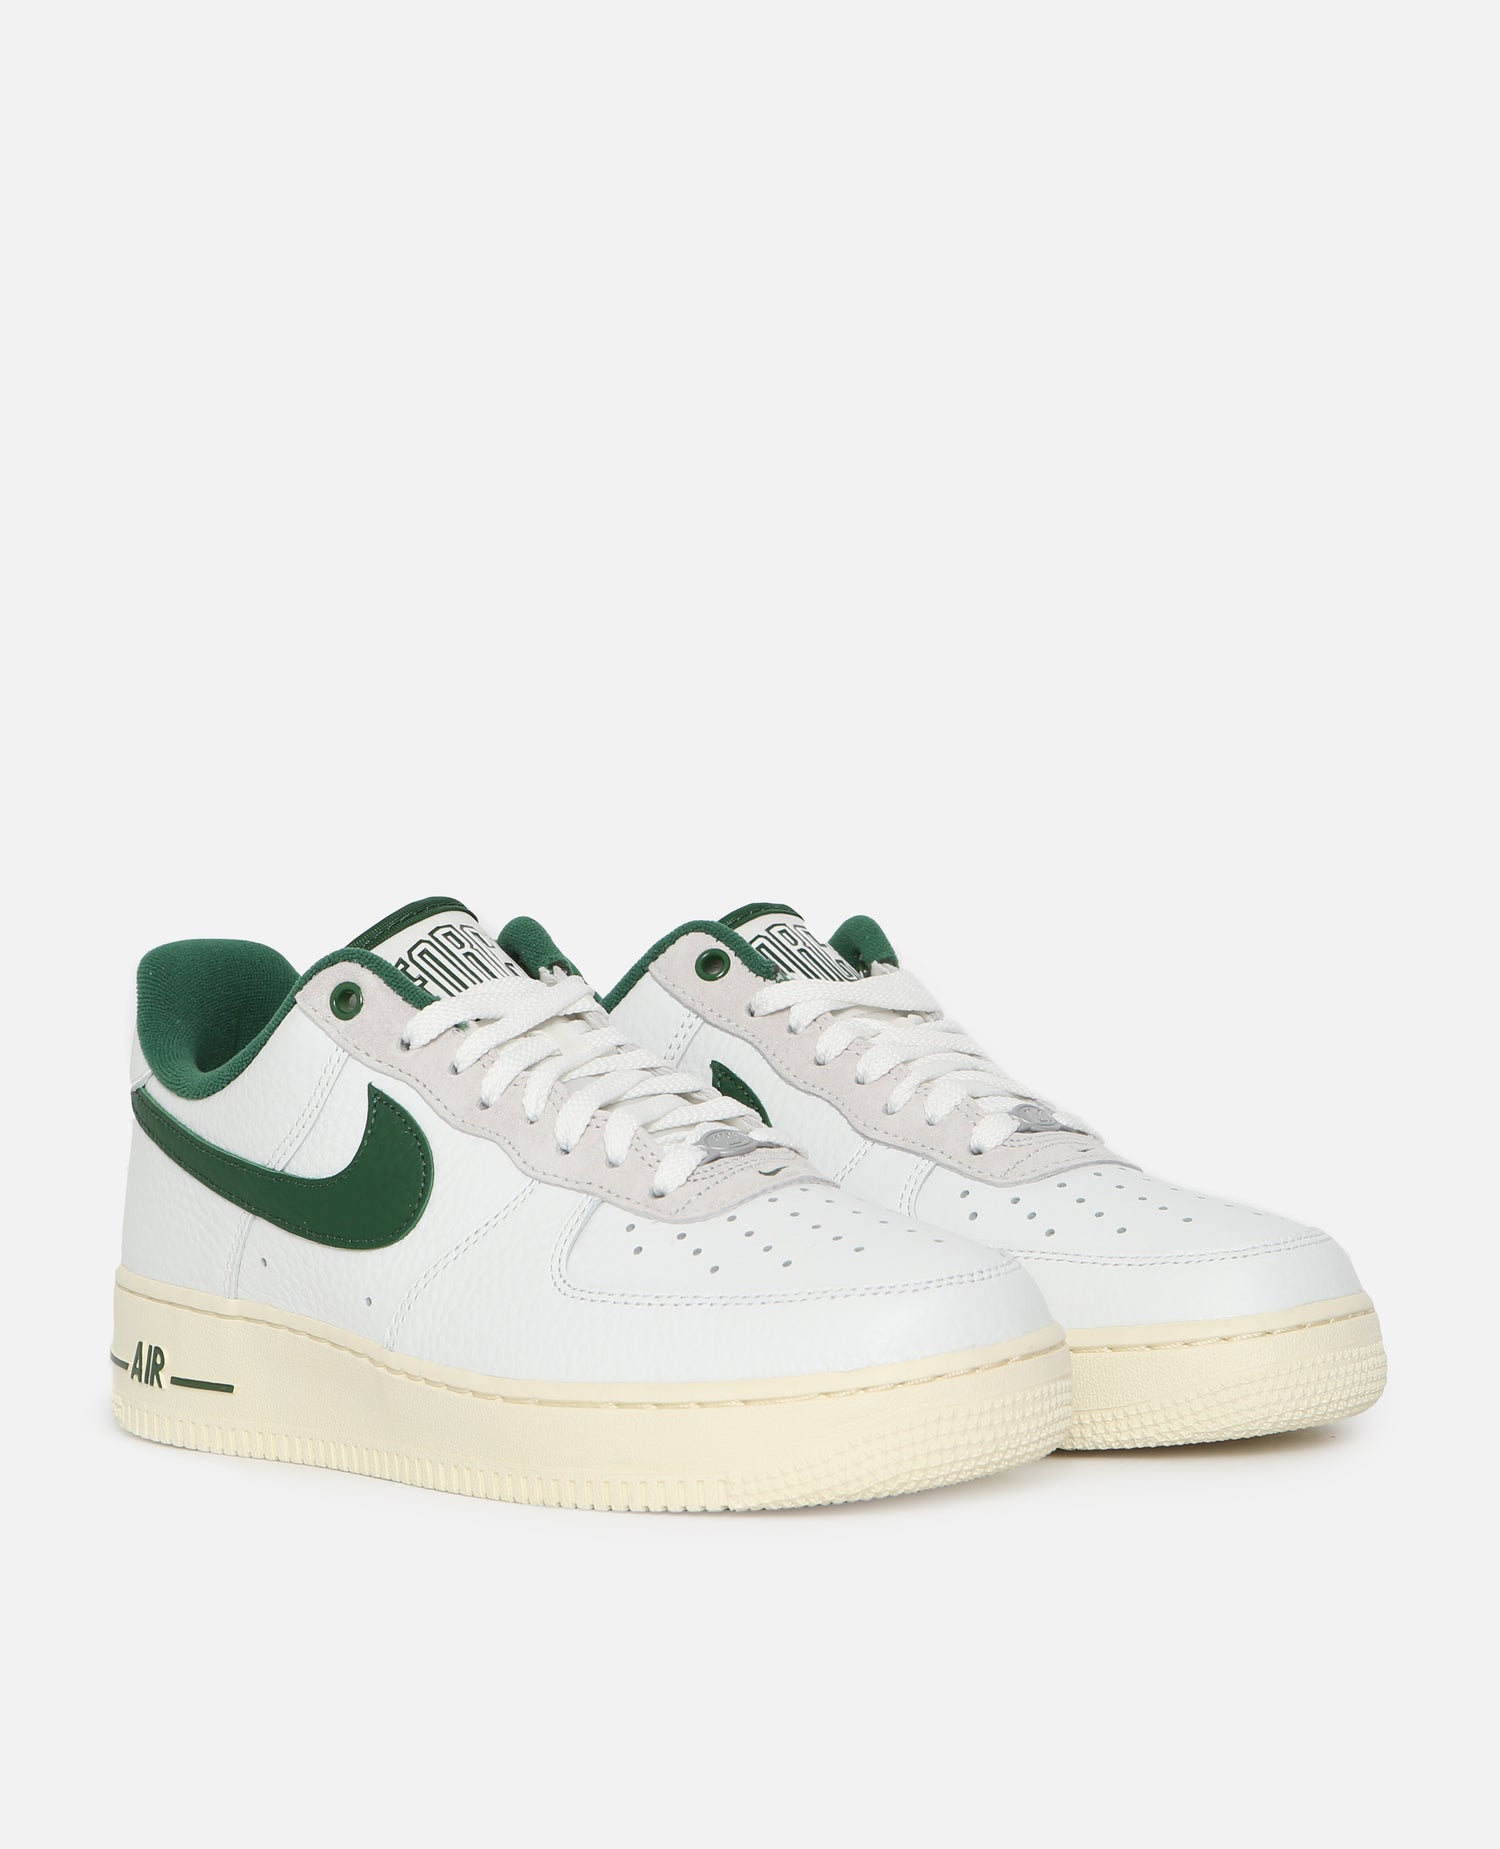 Nike WMNS Air Force 1 Low Command Force (Summit White/Gorge Green-White)